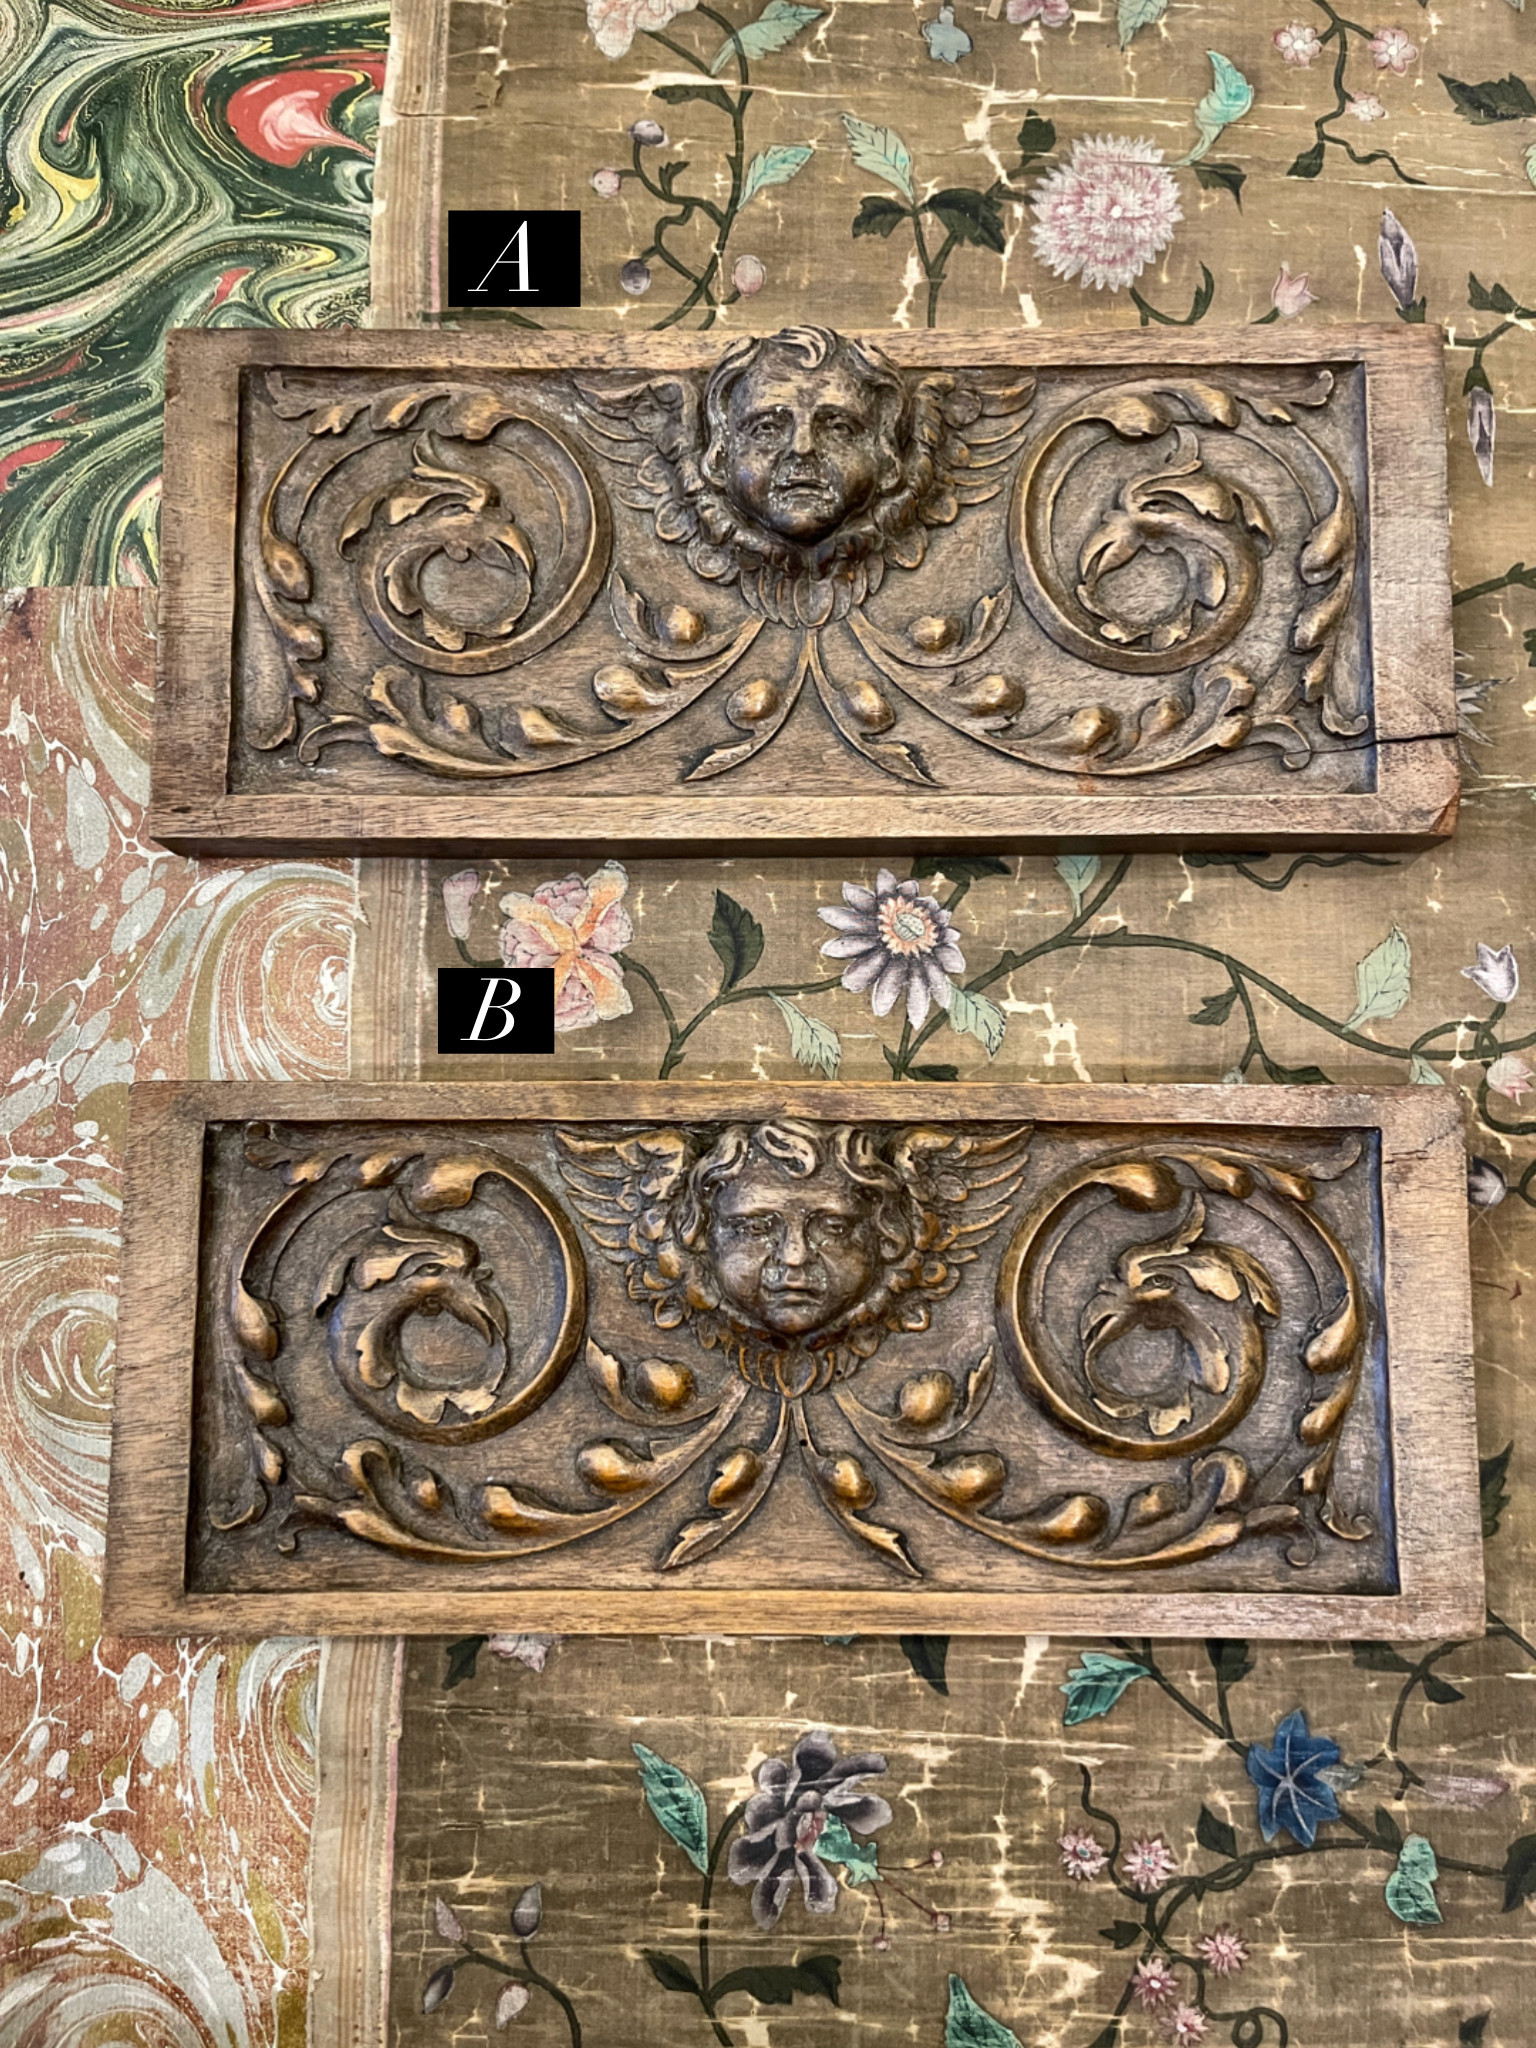 Antique Hand Carved French Drawer Front Wood Panels with Cherubs- F